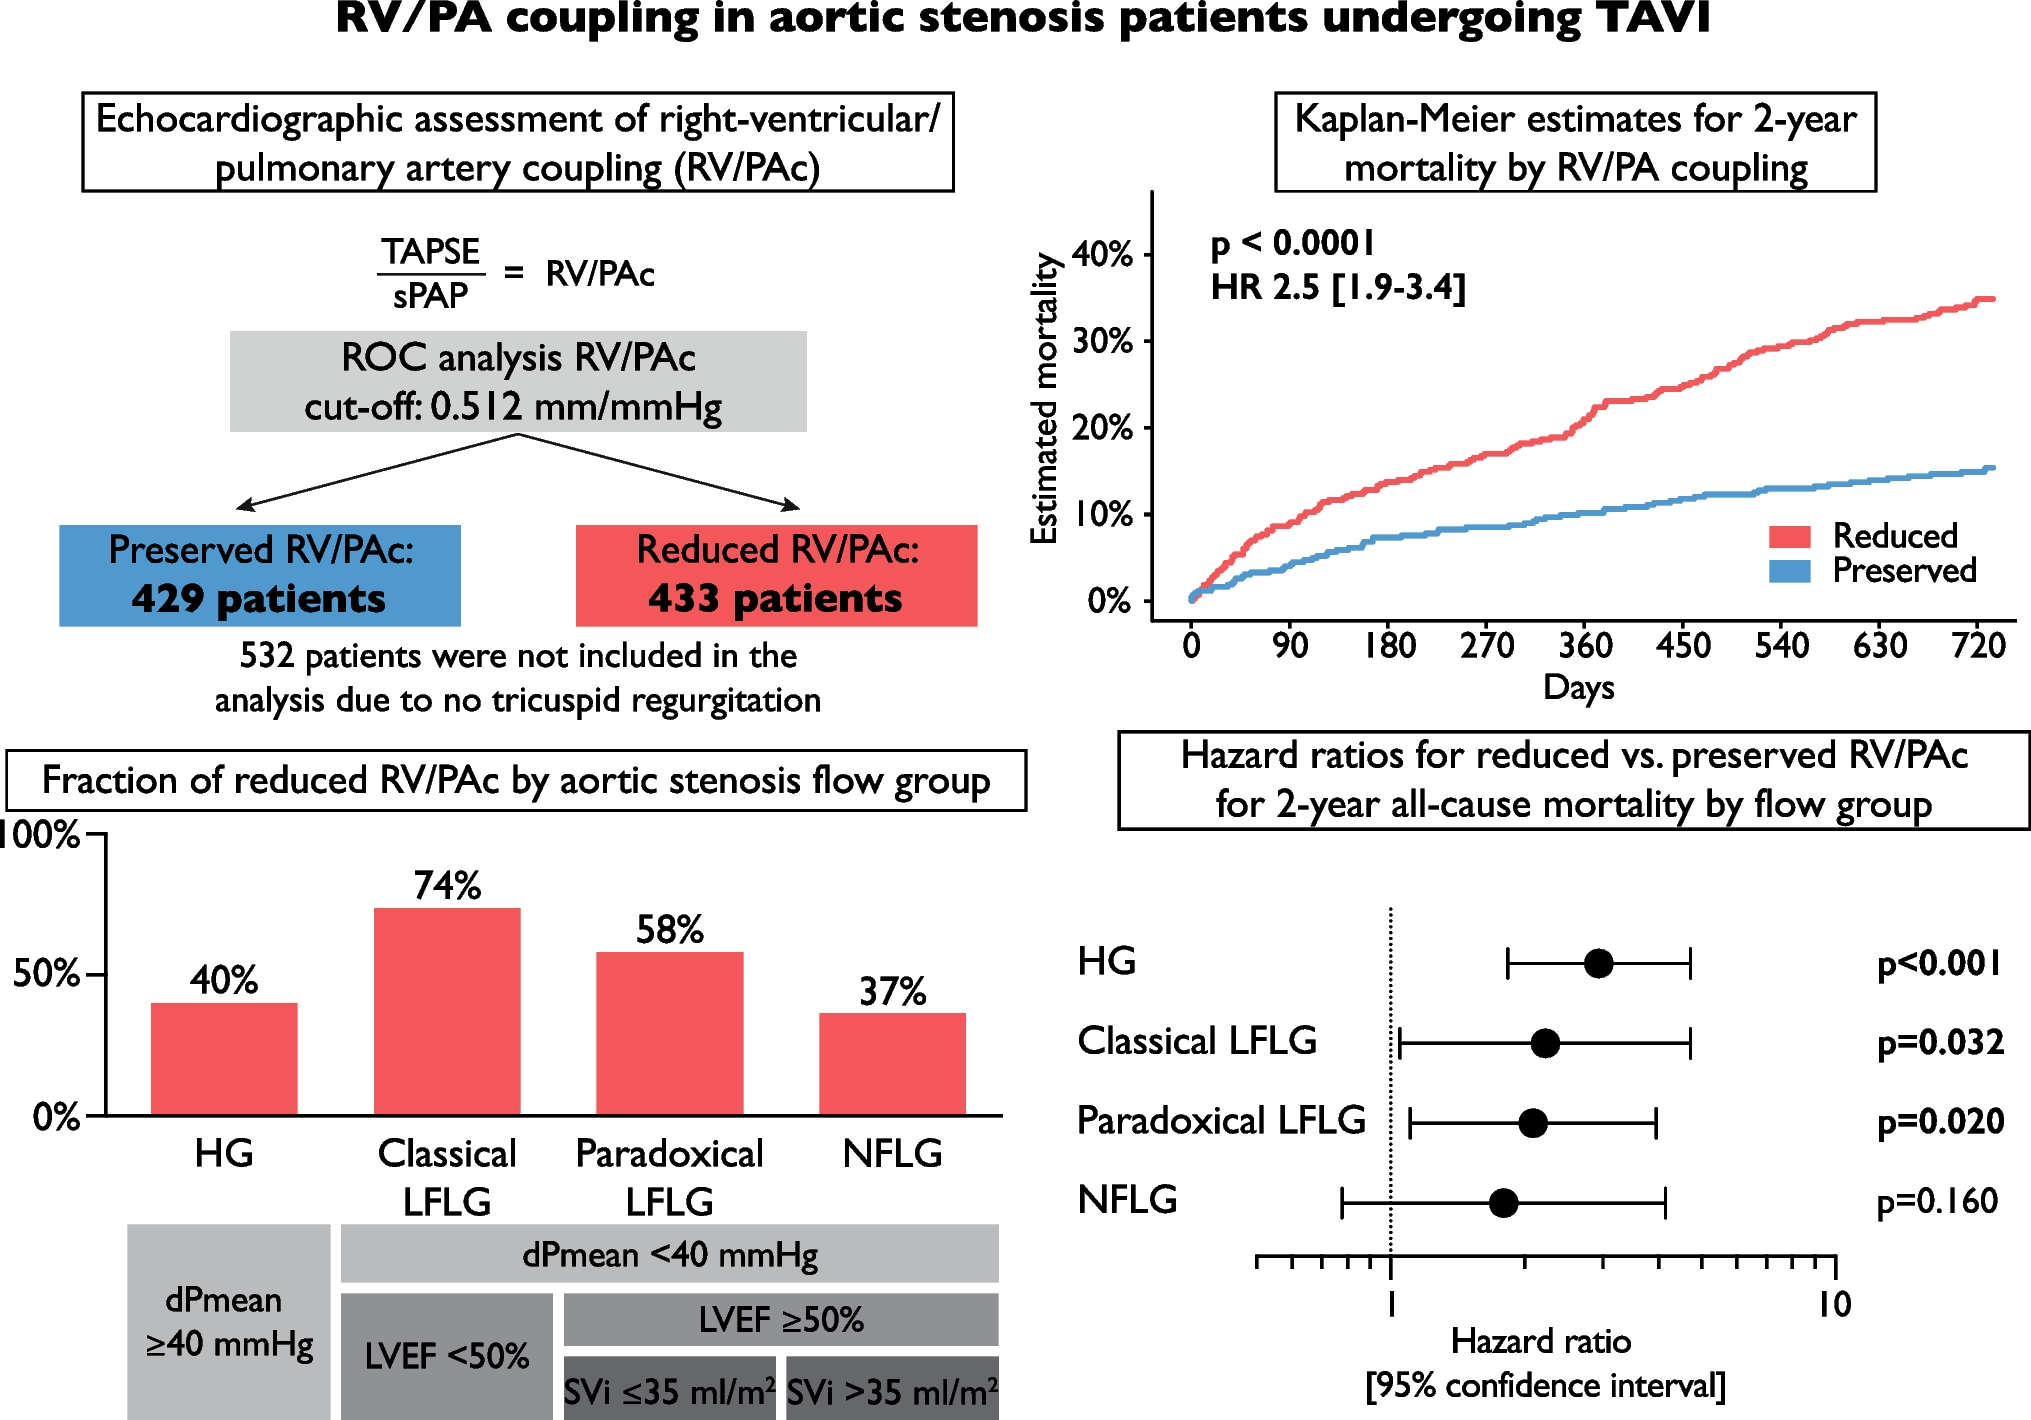 Right ventricular to pulmonary artery coupling in patients with different types of aortic stenosis undergoing TAVI